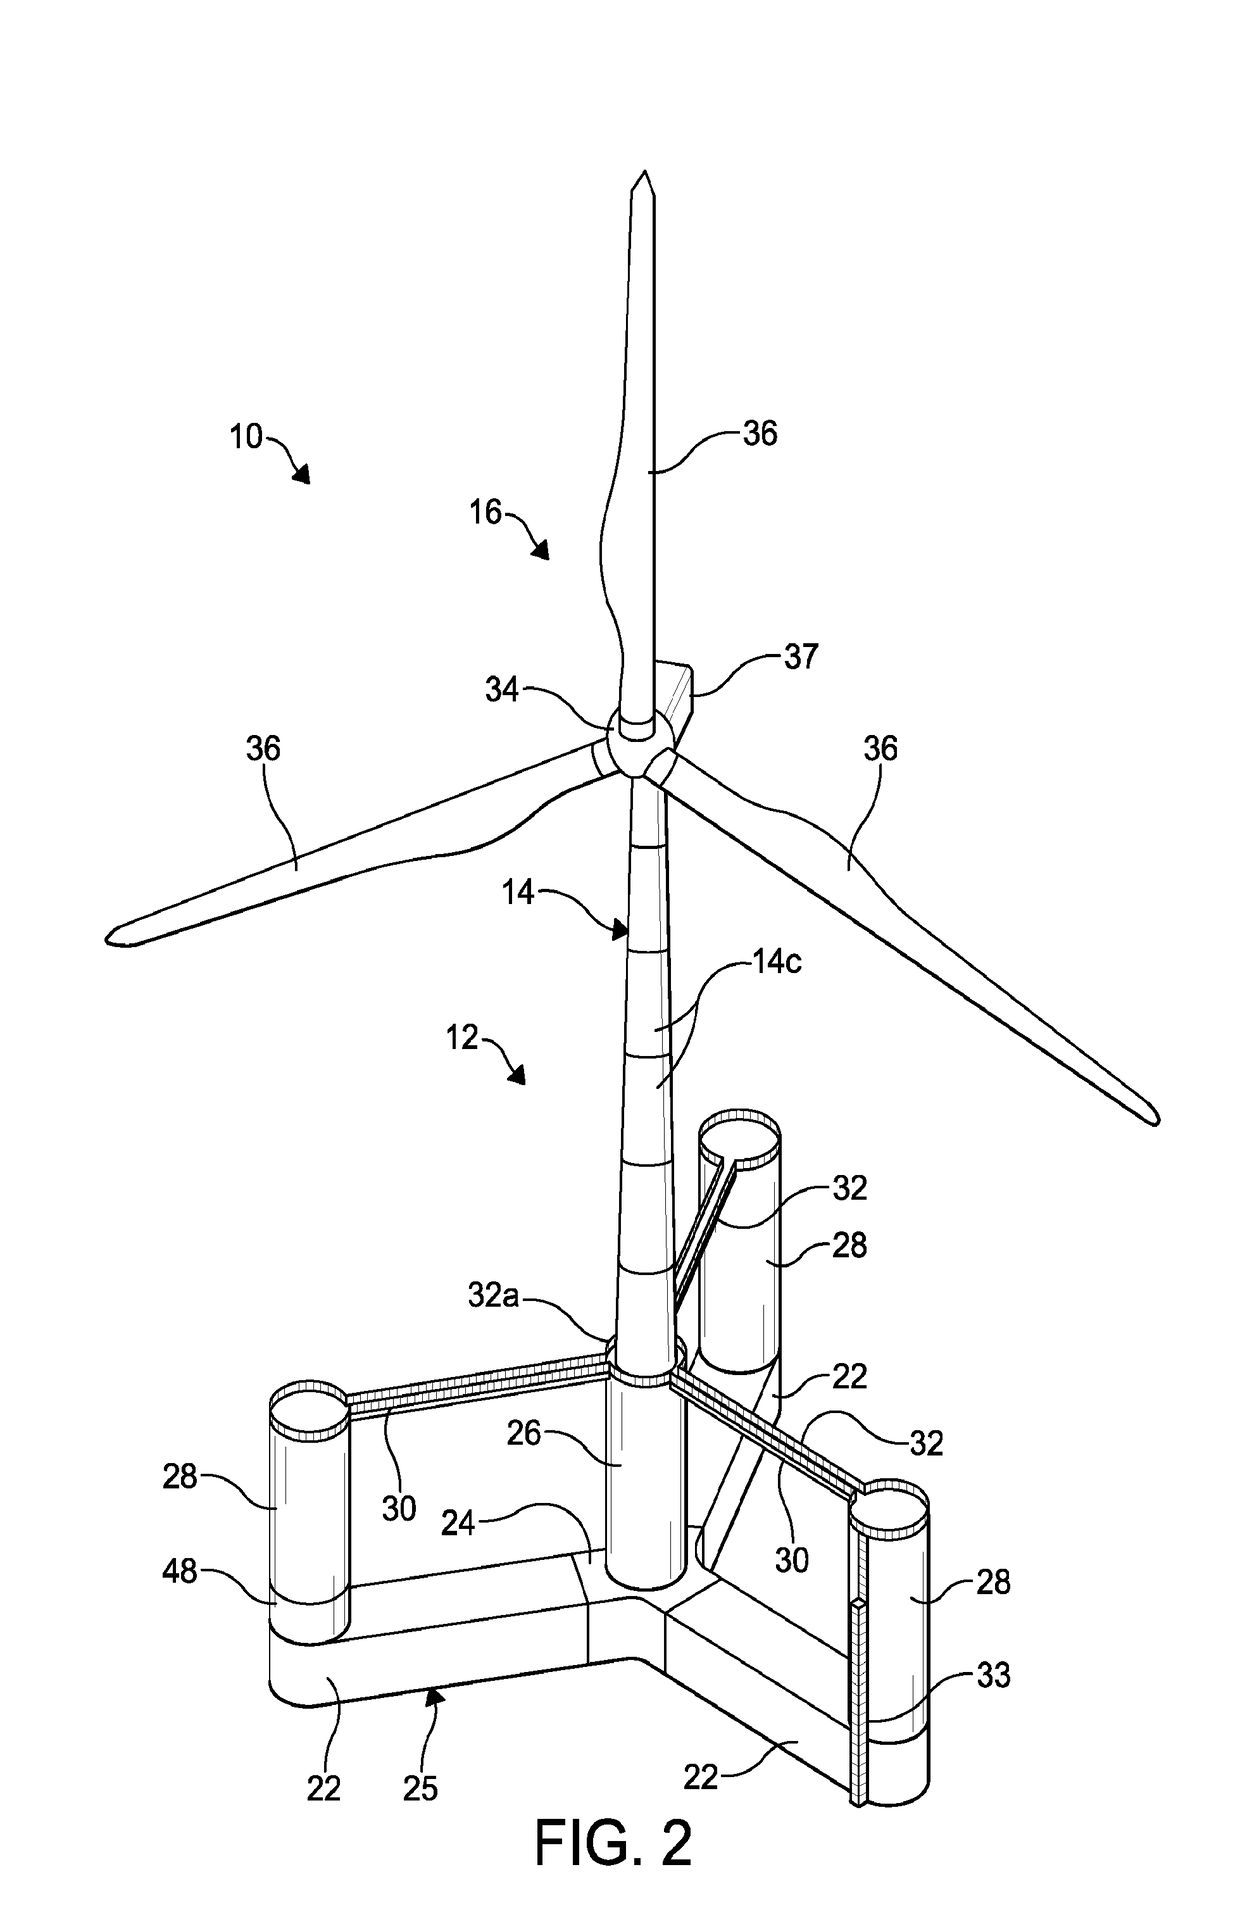 Method of construction, assembly, and launch of a floating wind turbine platform